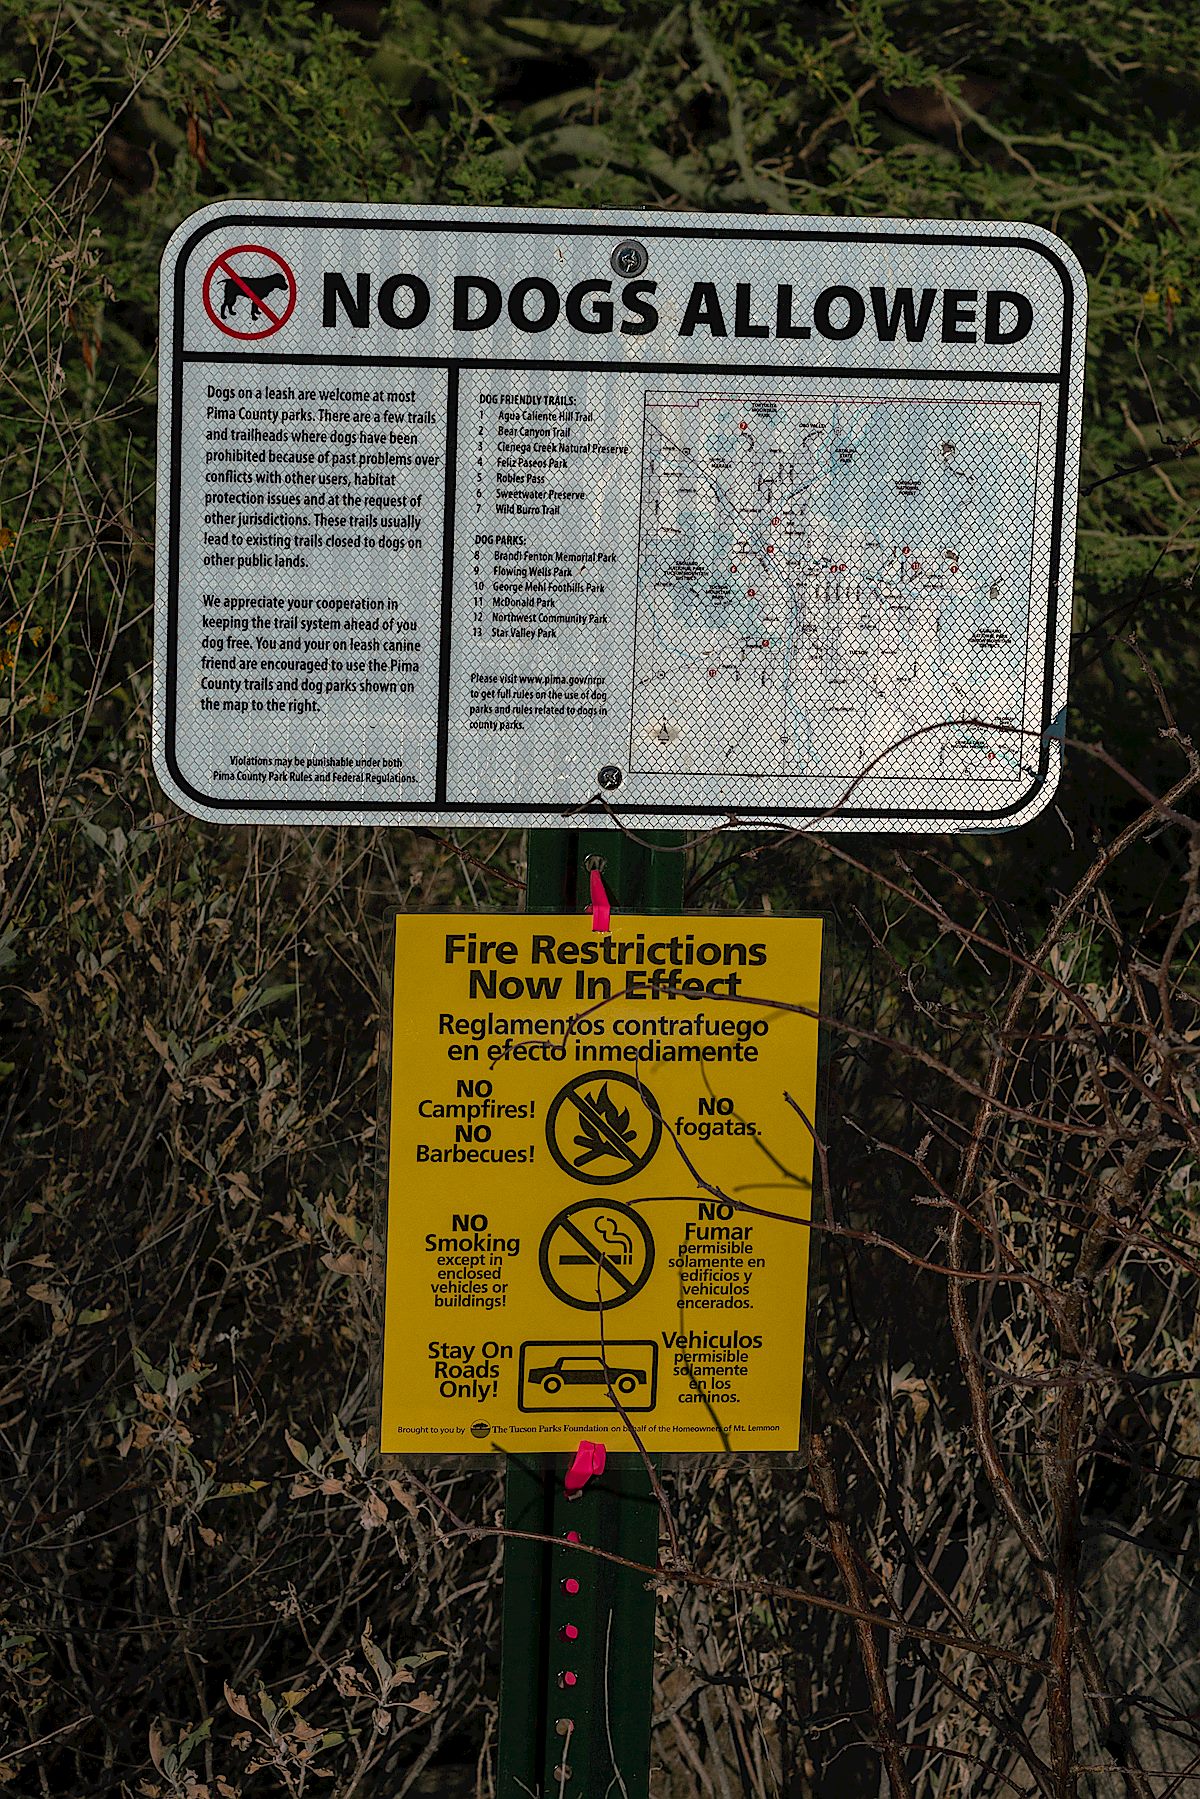 Temporary Yellow Fire Restrictions sign under the No Dogs Allowed sign at the Iris Dewhirst Pima Canyon Trailhead. May 2018.